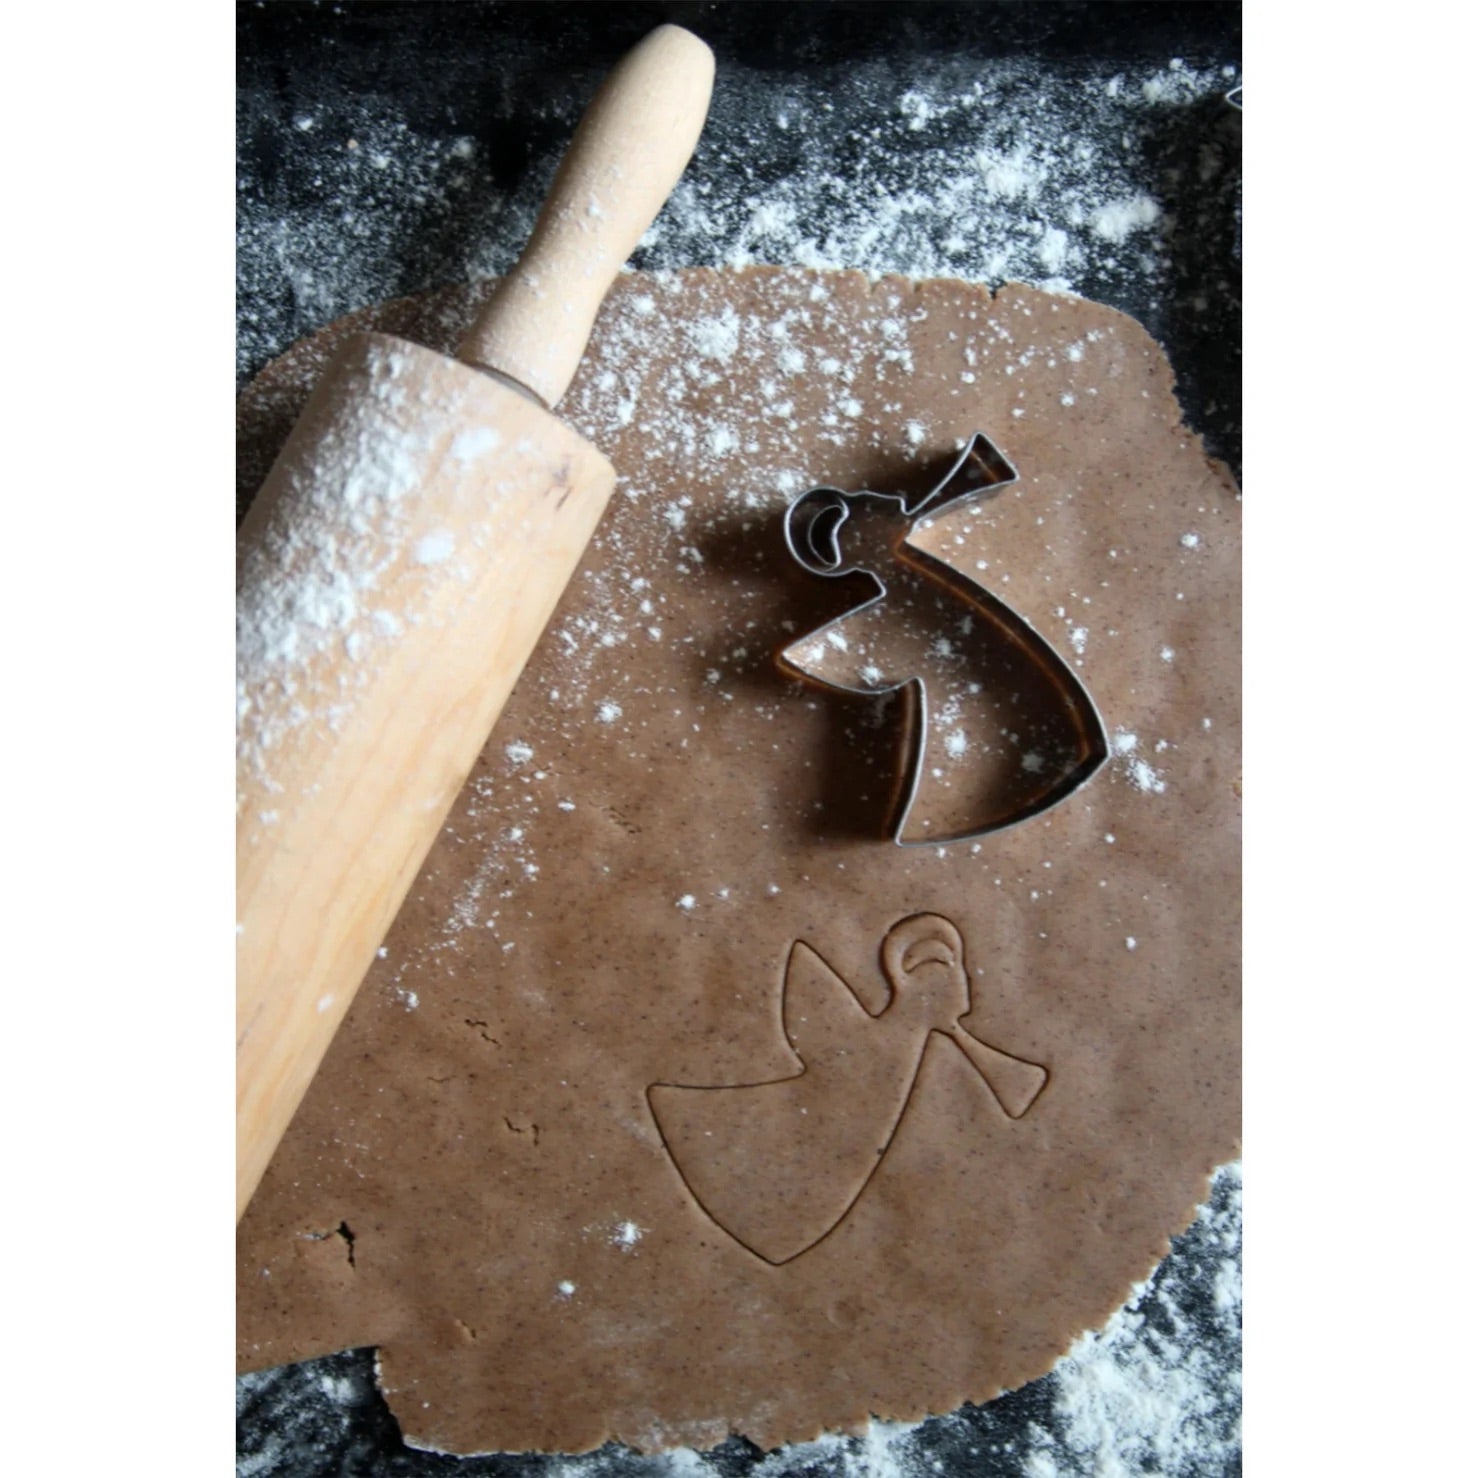 Angel Cookie Cutter in use